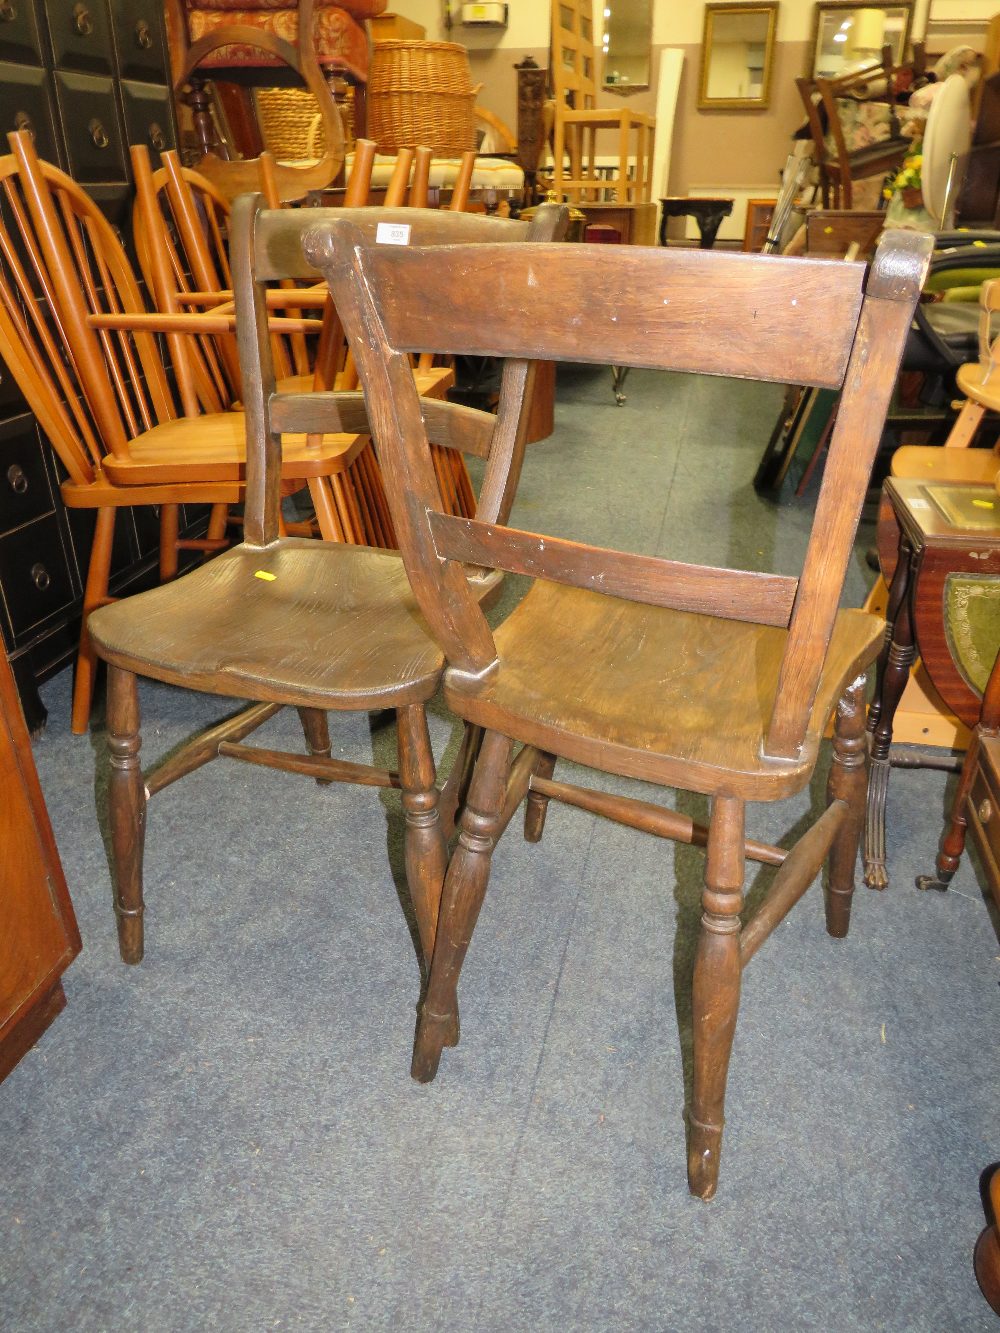 A PAIR OF TRADITIONAL KITCHEN CHAIRS - Image 3 of 3